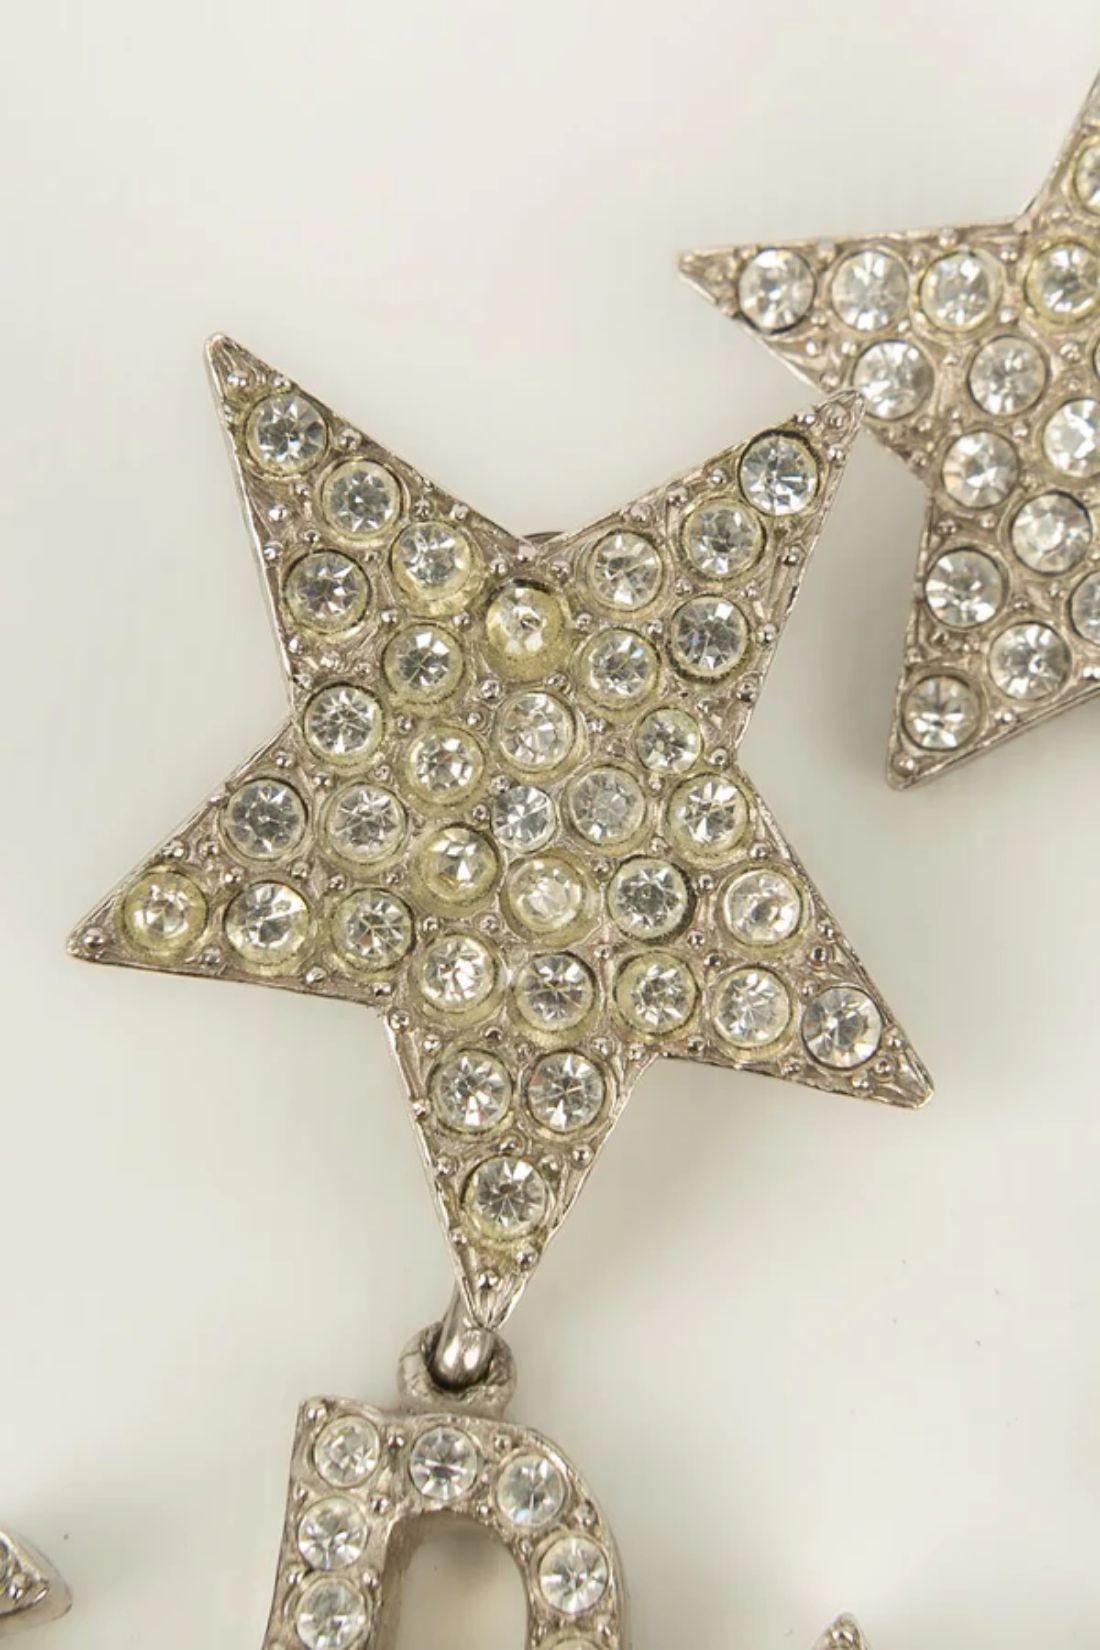 Yves Saint Laurent Earrings in Silver Plated Metal Paved with Rhinestones In Excellent Condition For Sale In SAINT-OUEN-SUR-SEINE, FR